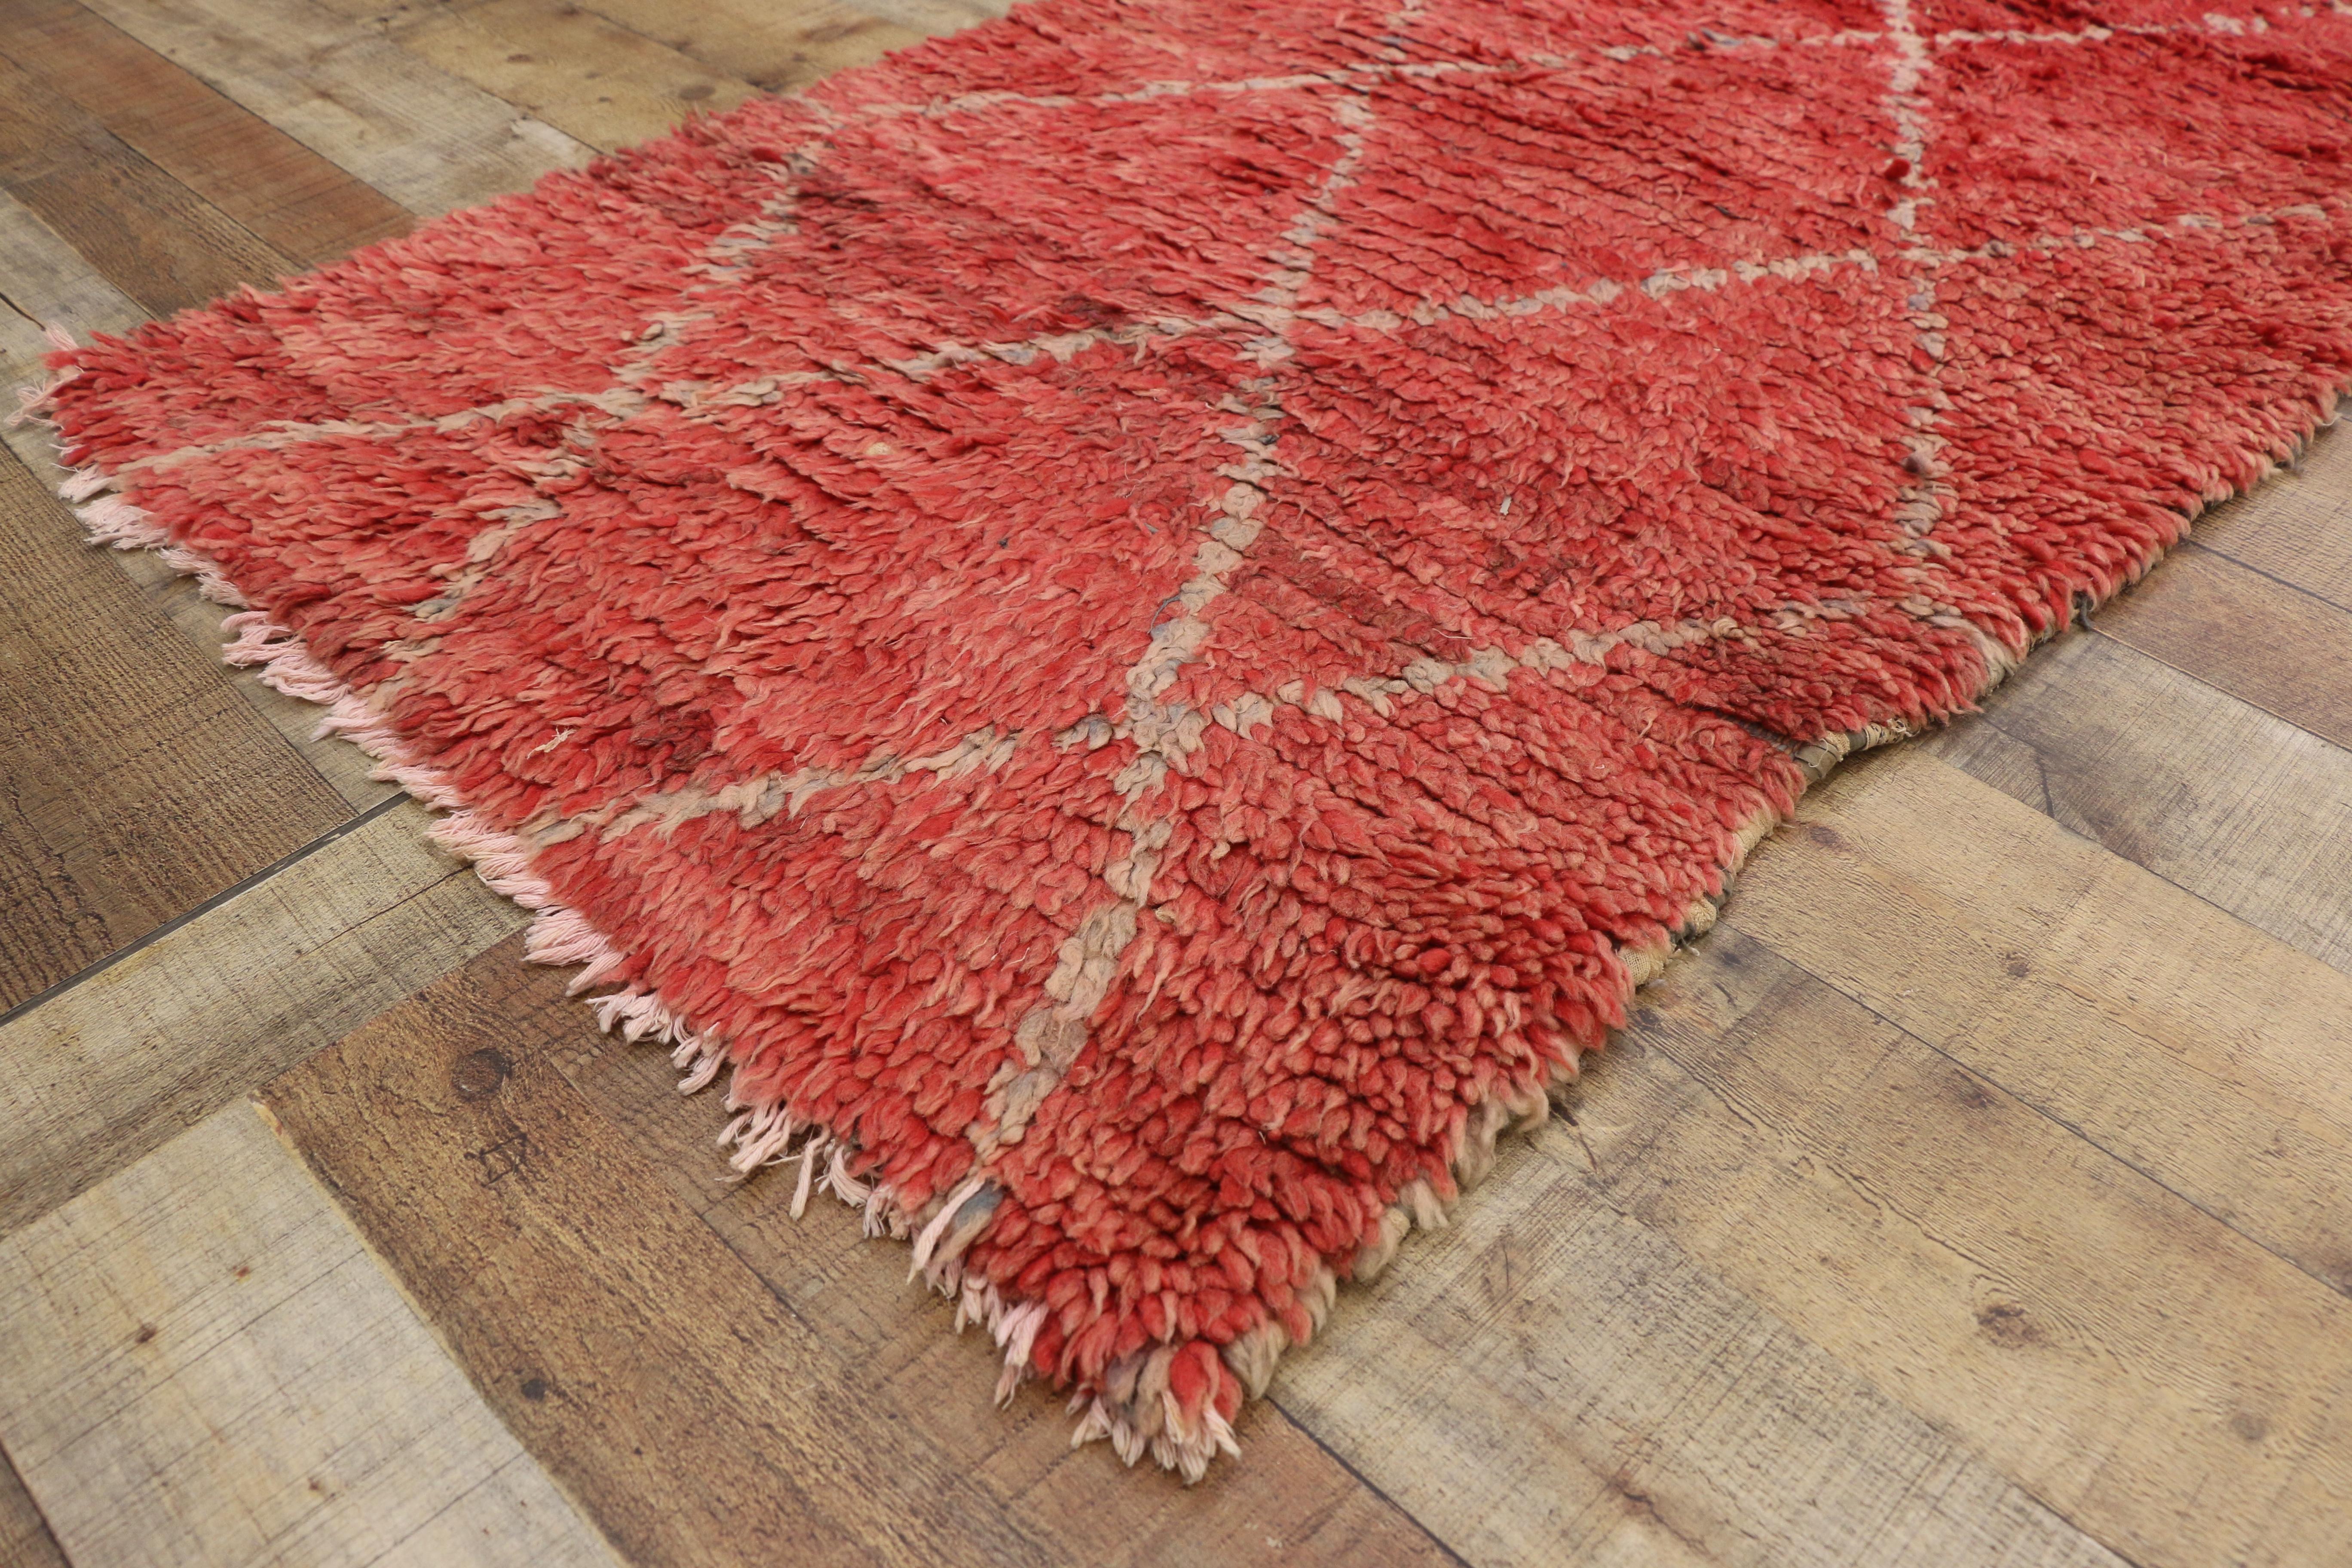 Vintage Berber Moroccan Runner with Tribal Style, Red Shag Hallway Runner 1